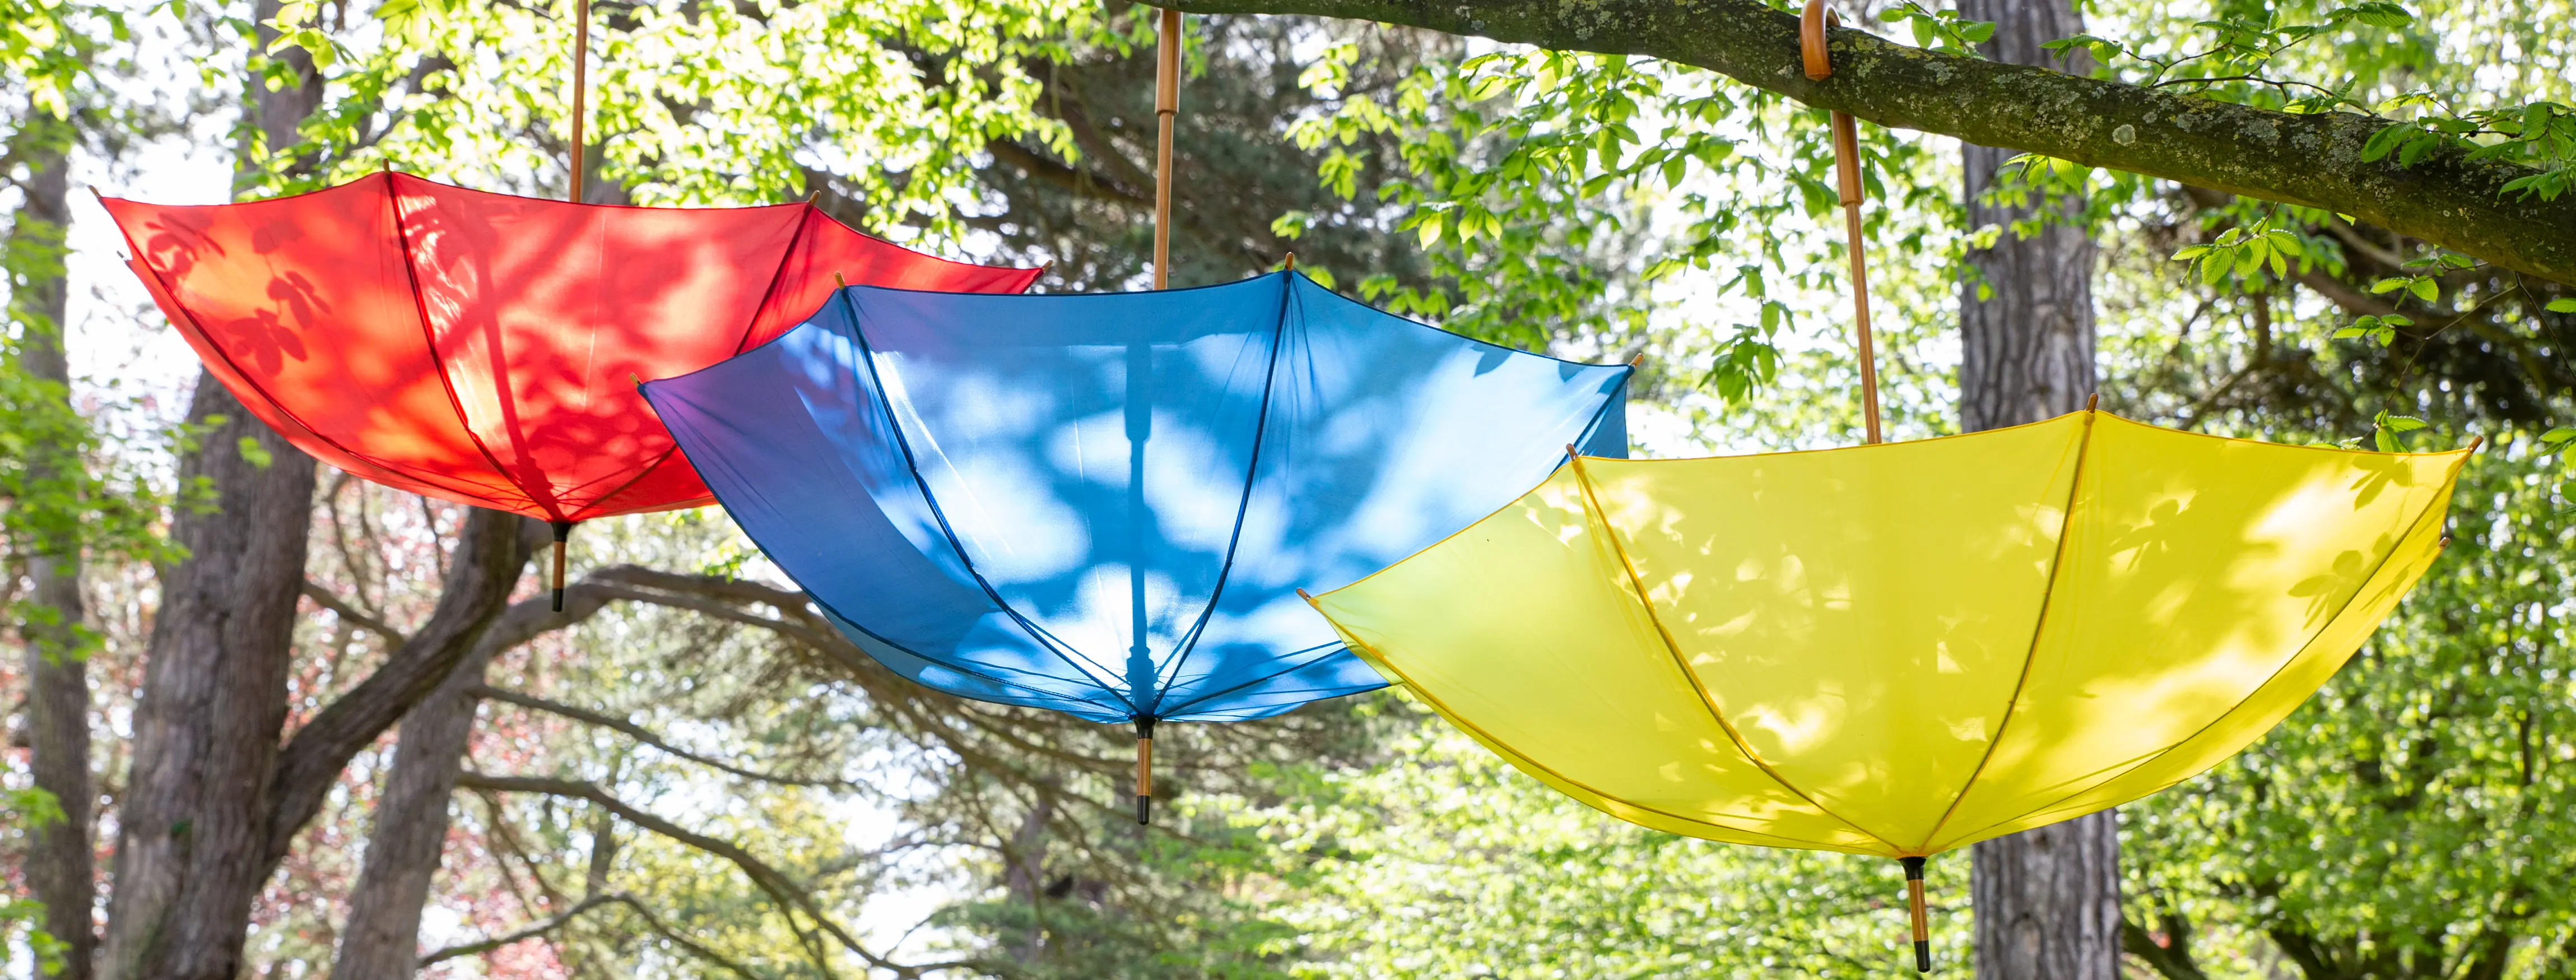 Three umbrellas, one red, one yellow and one blue, hanging upside down from a tree branch.